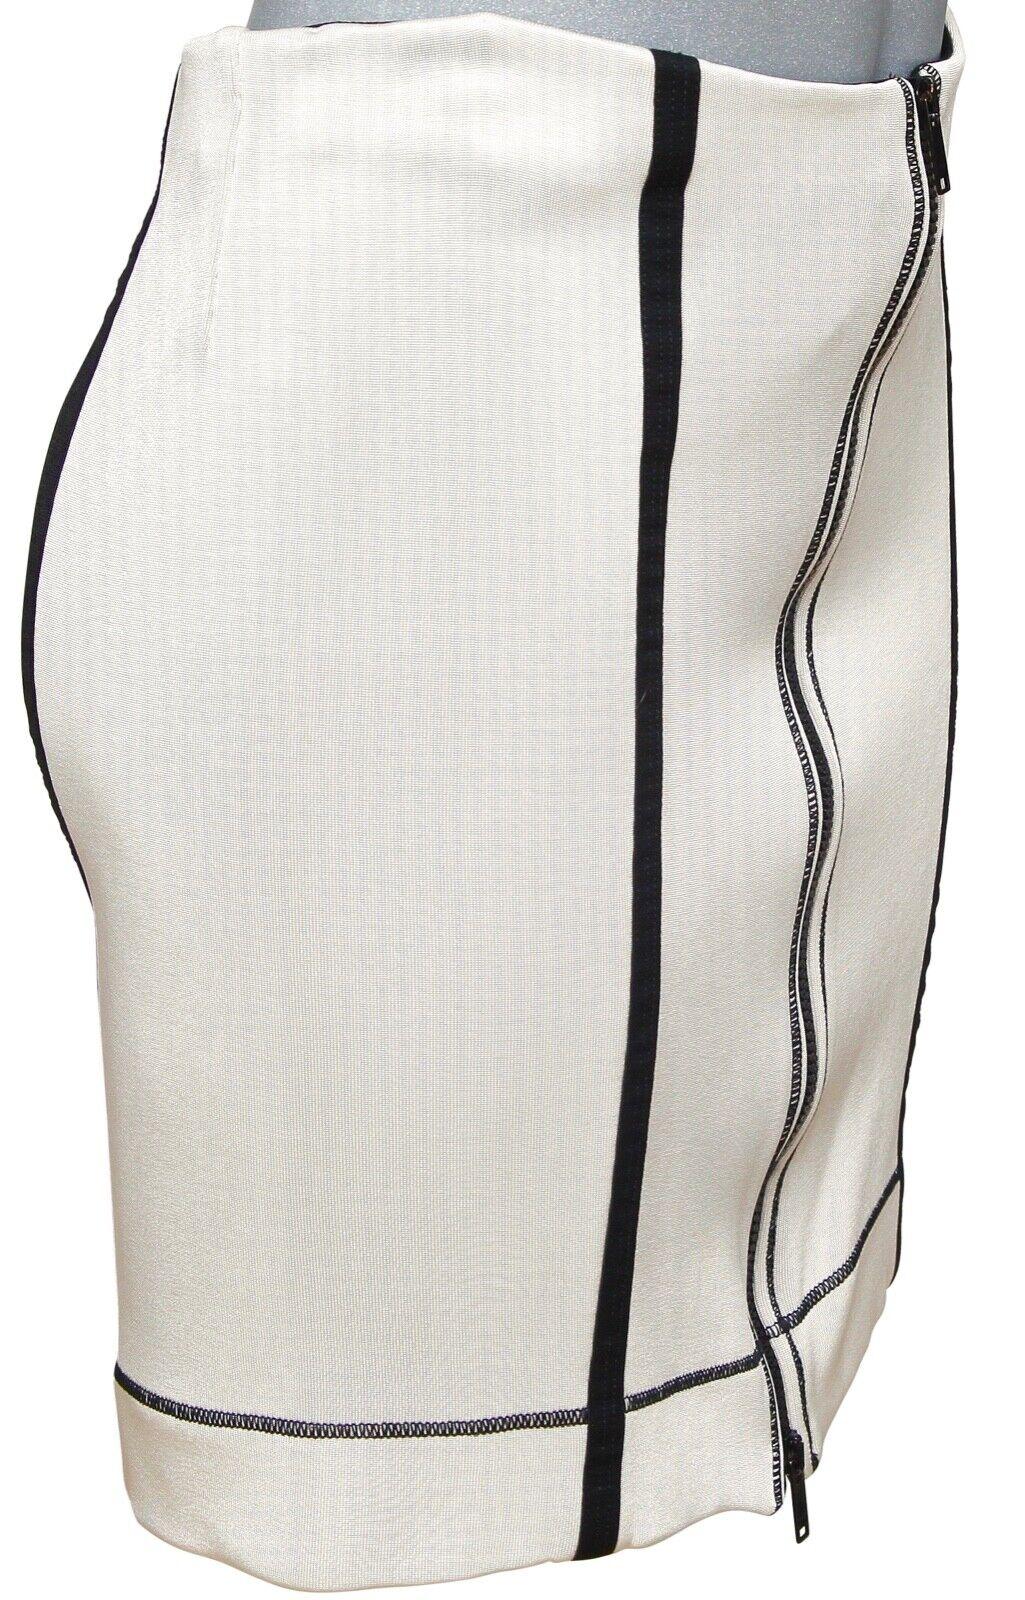 GUARANTEED AUTHENTIC GUCCI FRONT ZIPPER BODYCON SKIRT


Design:
- Viscose blend bodycon pencil skirt in a fresh ivory color.
- Black vertical and hem stripes.
- Exposed front zipper, dual closure.
- Unlined.

Material: 77% Viscose, 13% Polyamide,